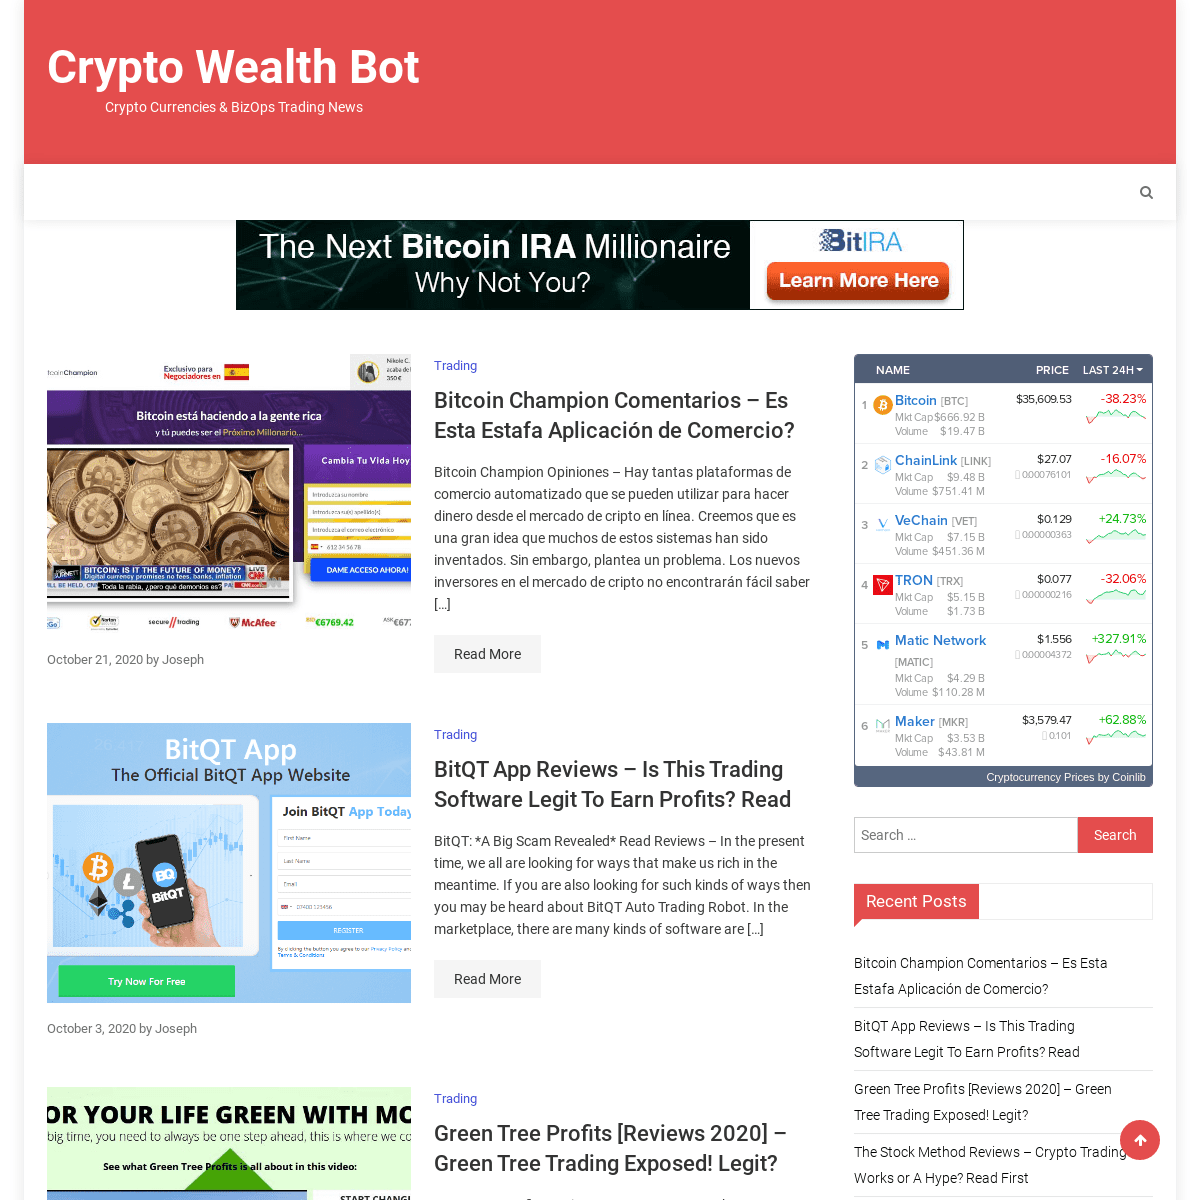 A complete backup of https://cryptowealthbot.com